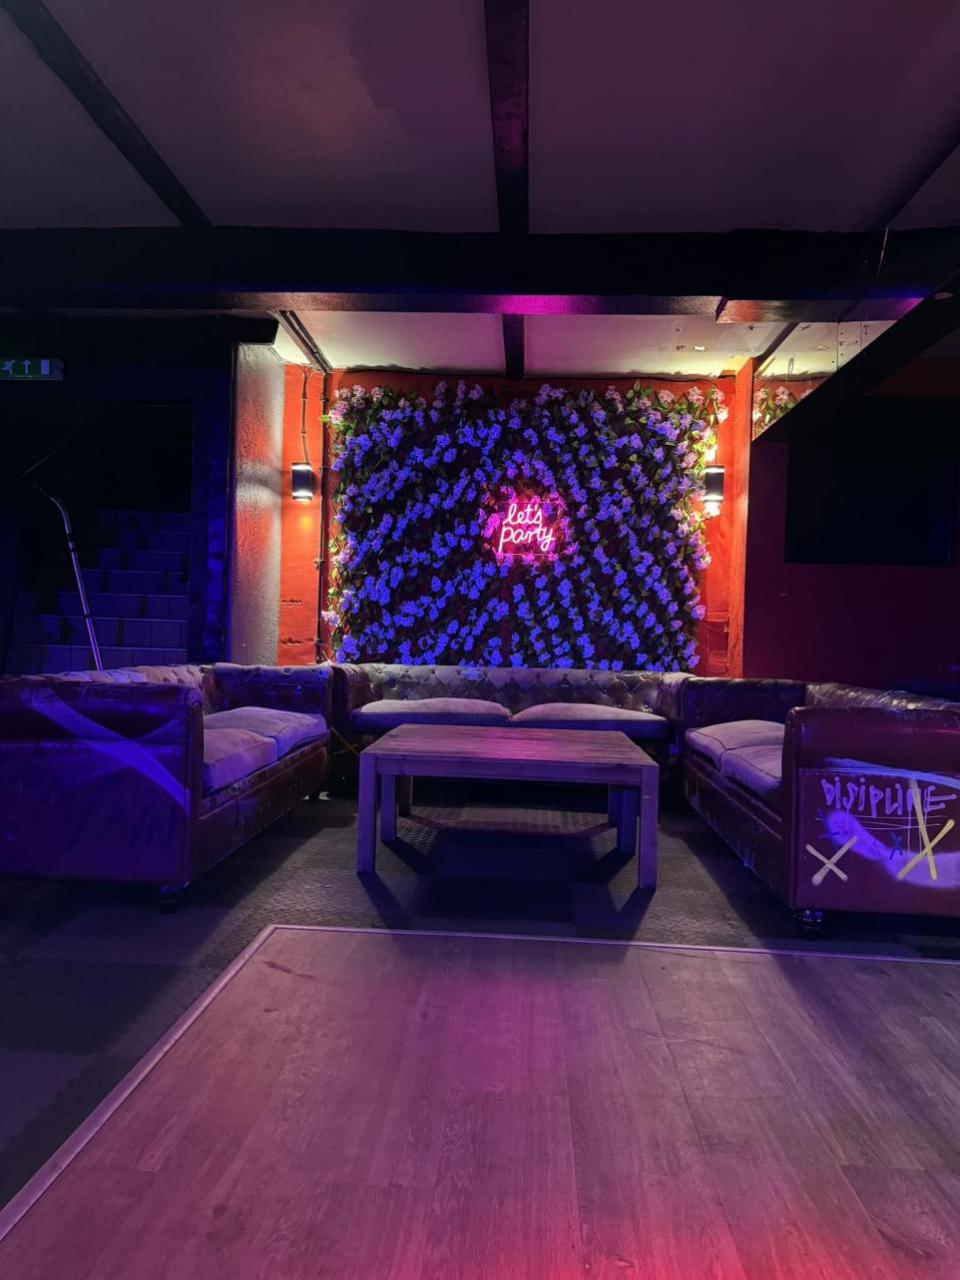 Eastern Daily Press: The nightclub is reportedly one of the only night-time venues of its kind in the area, outside of Norwich and King's Lynn